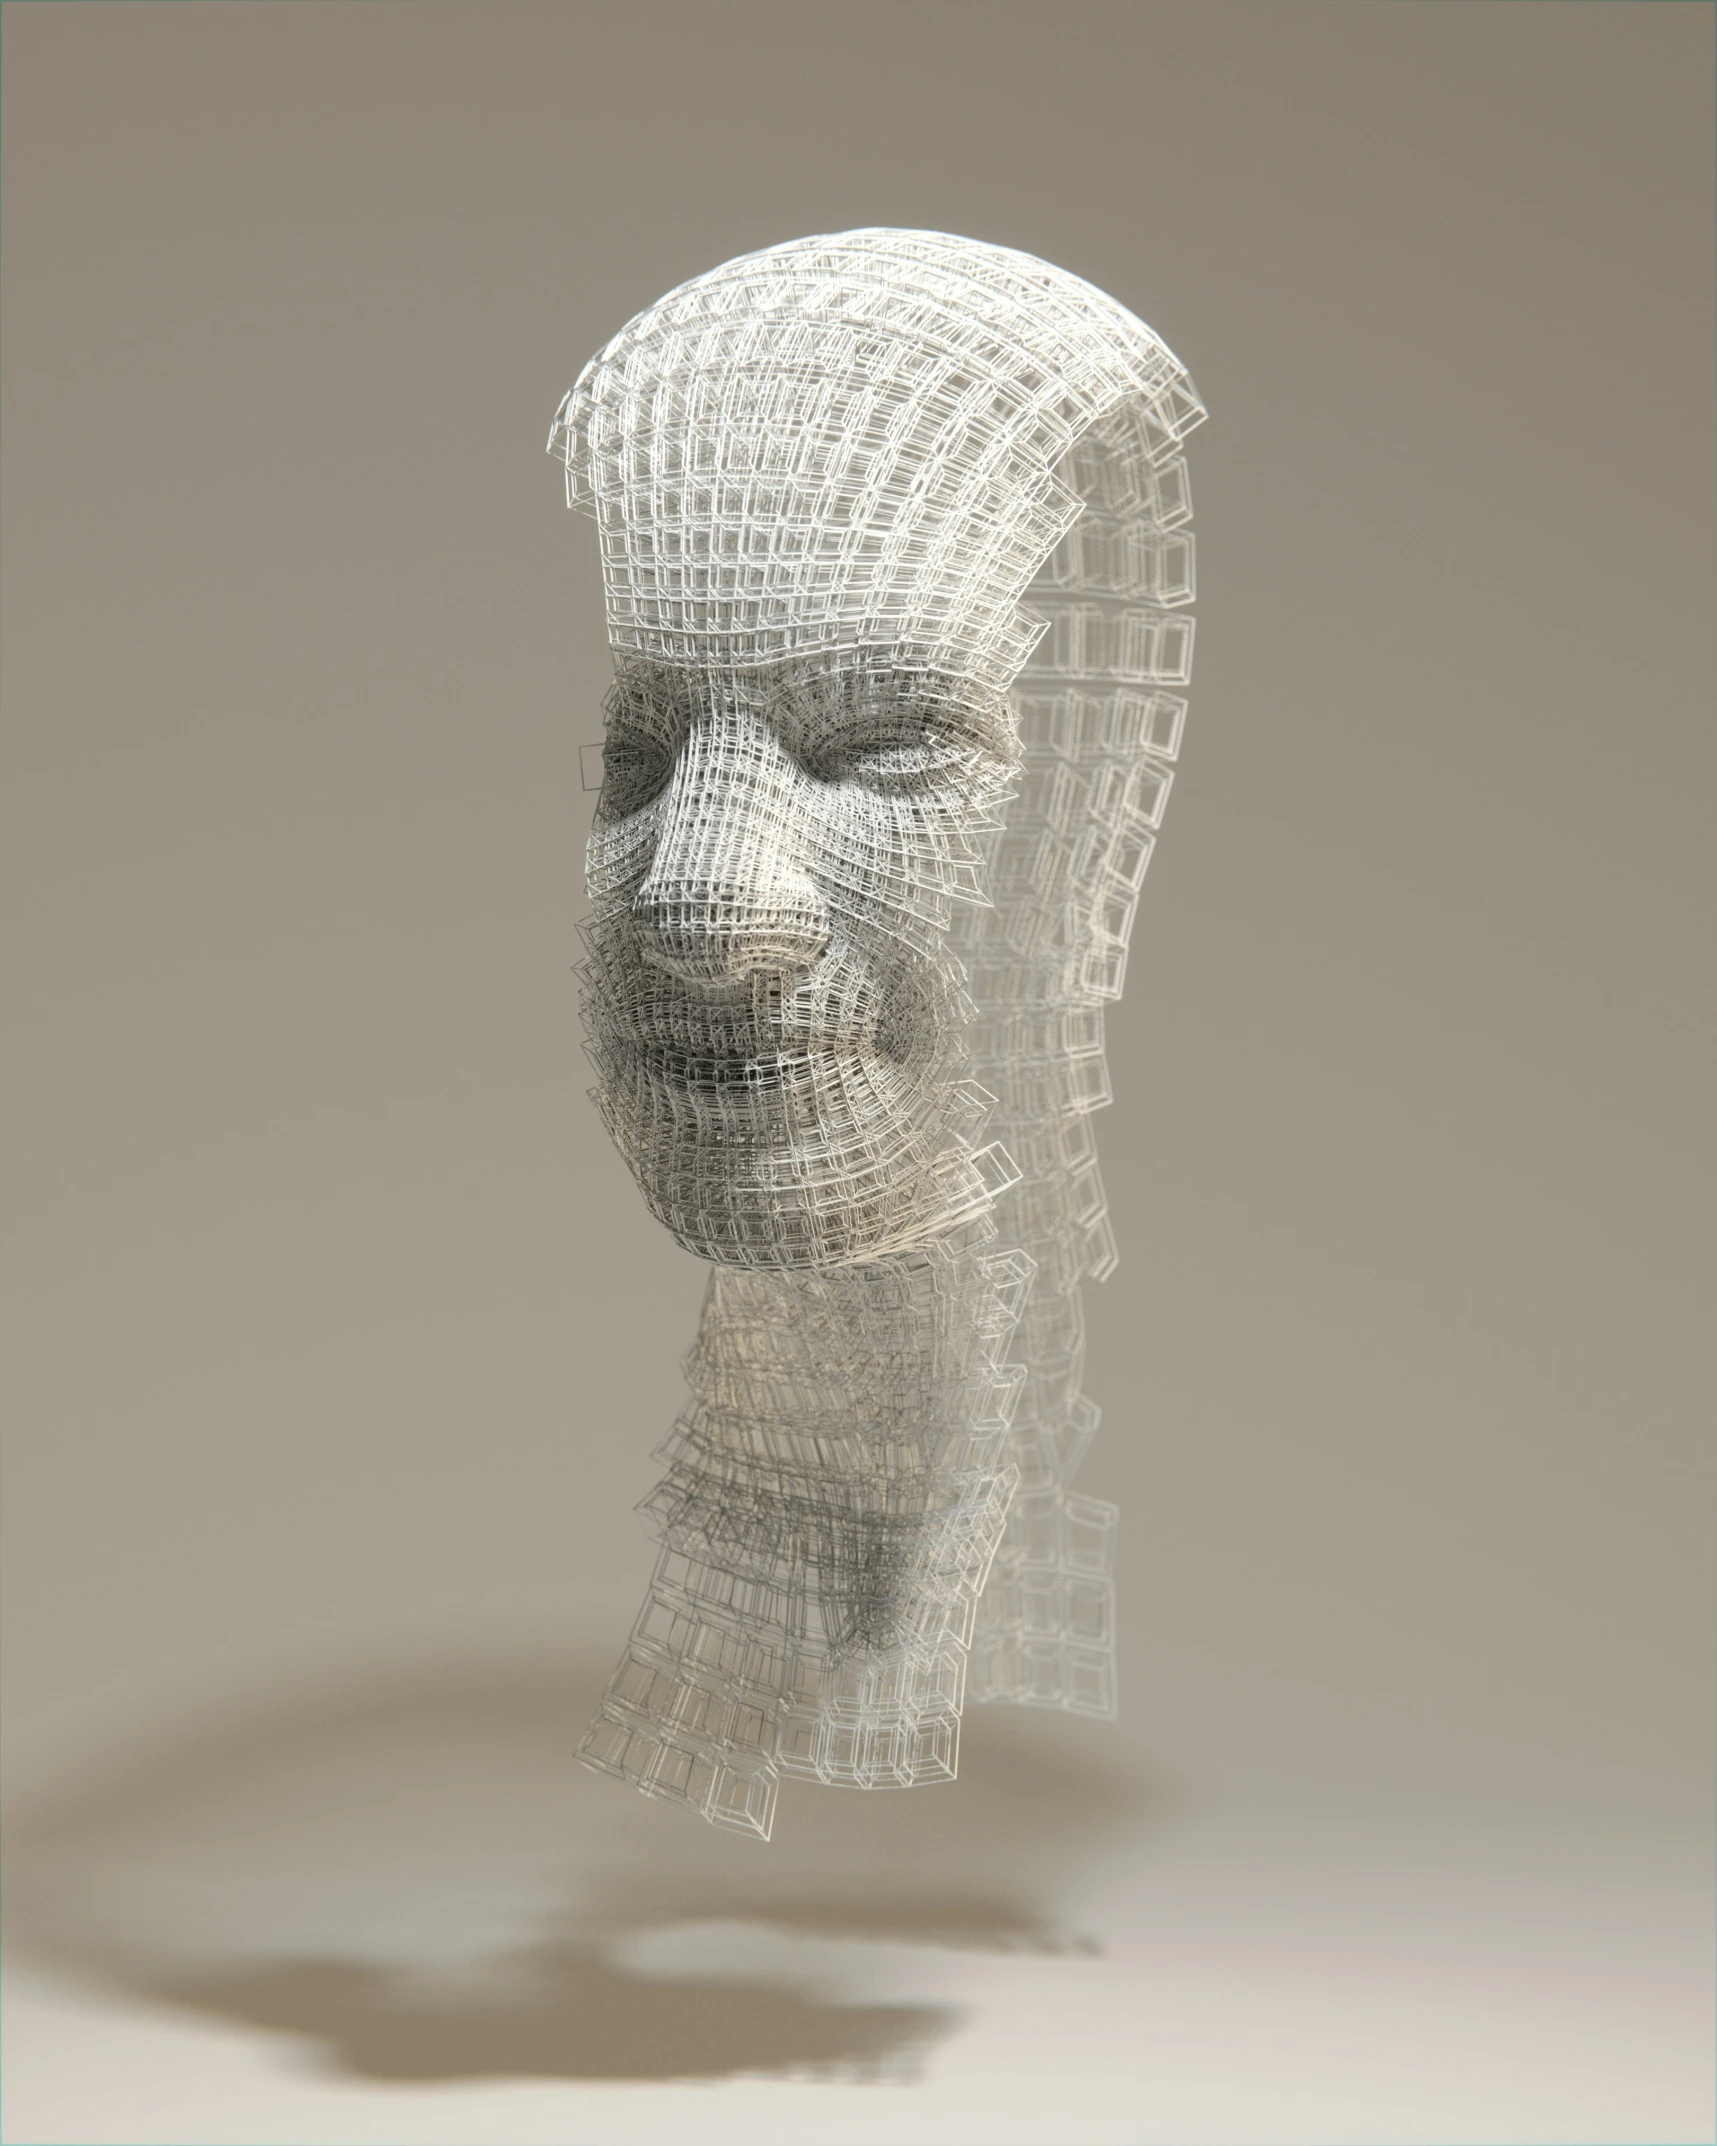 a large head made out of strings is shown with a light background